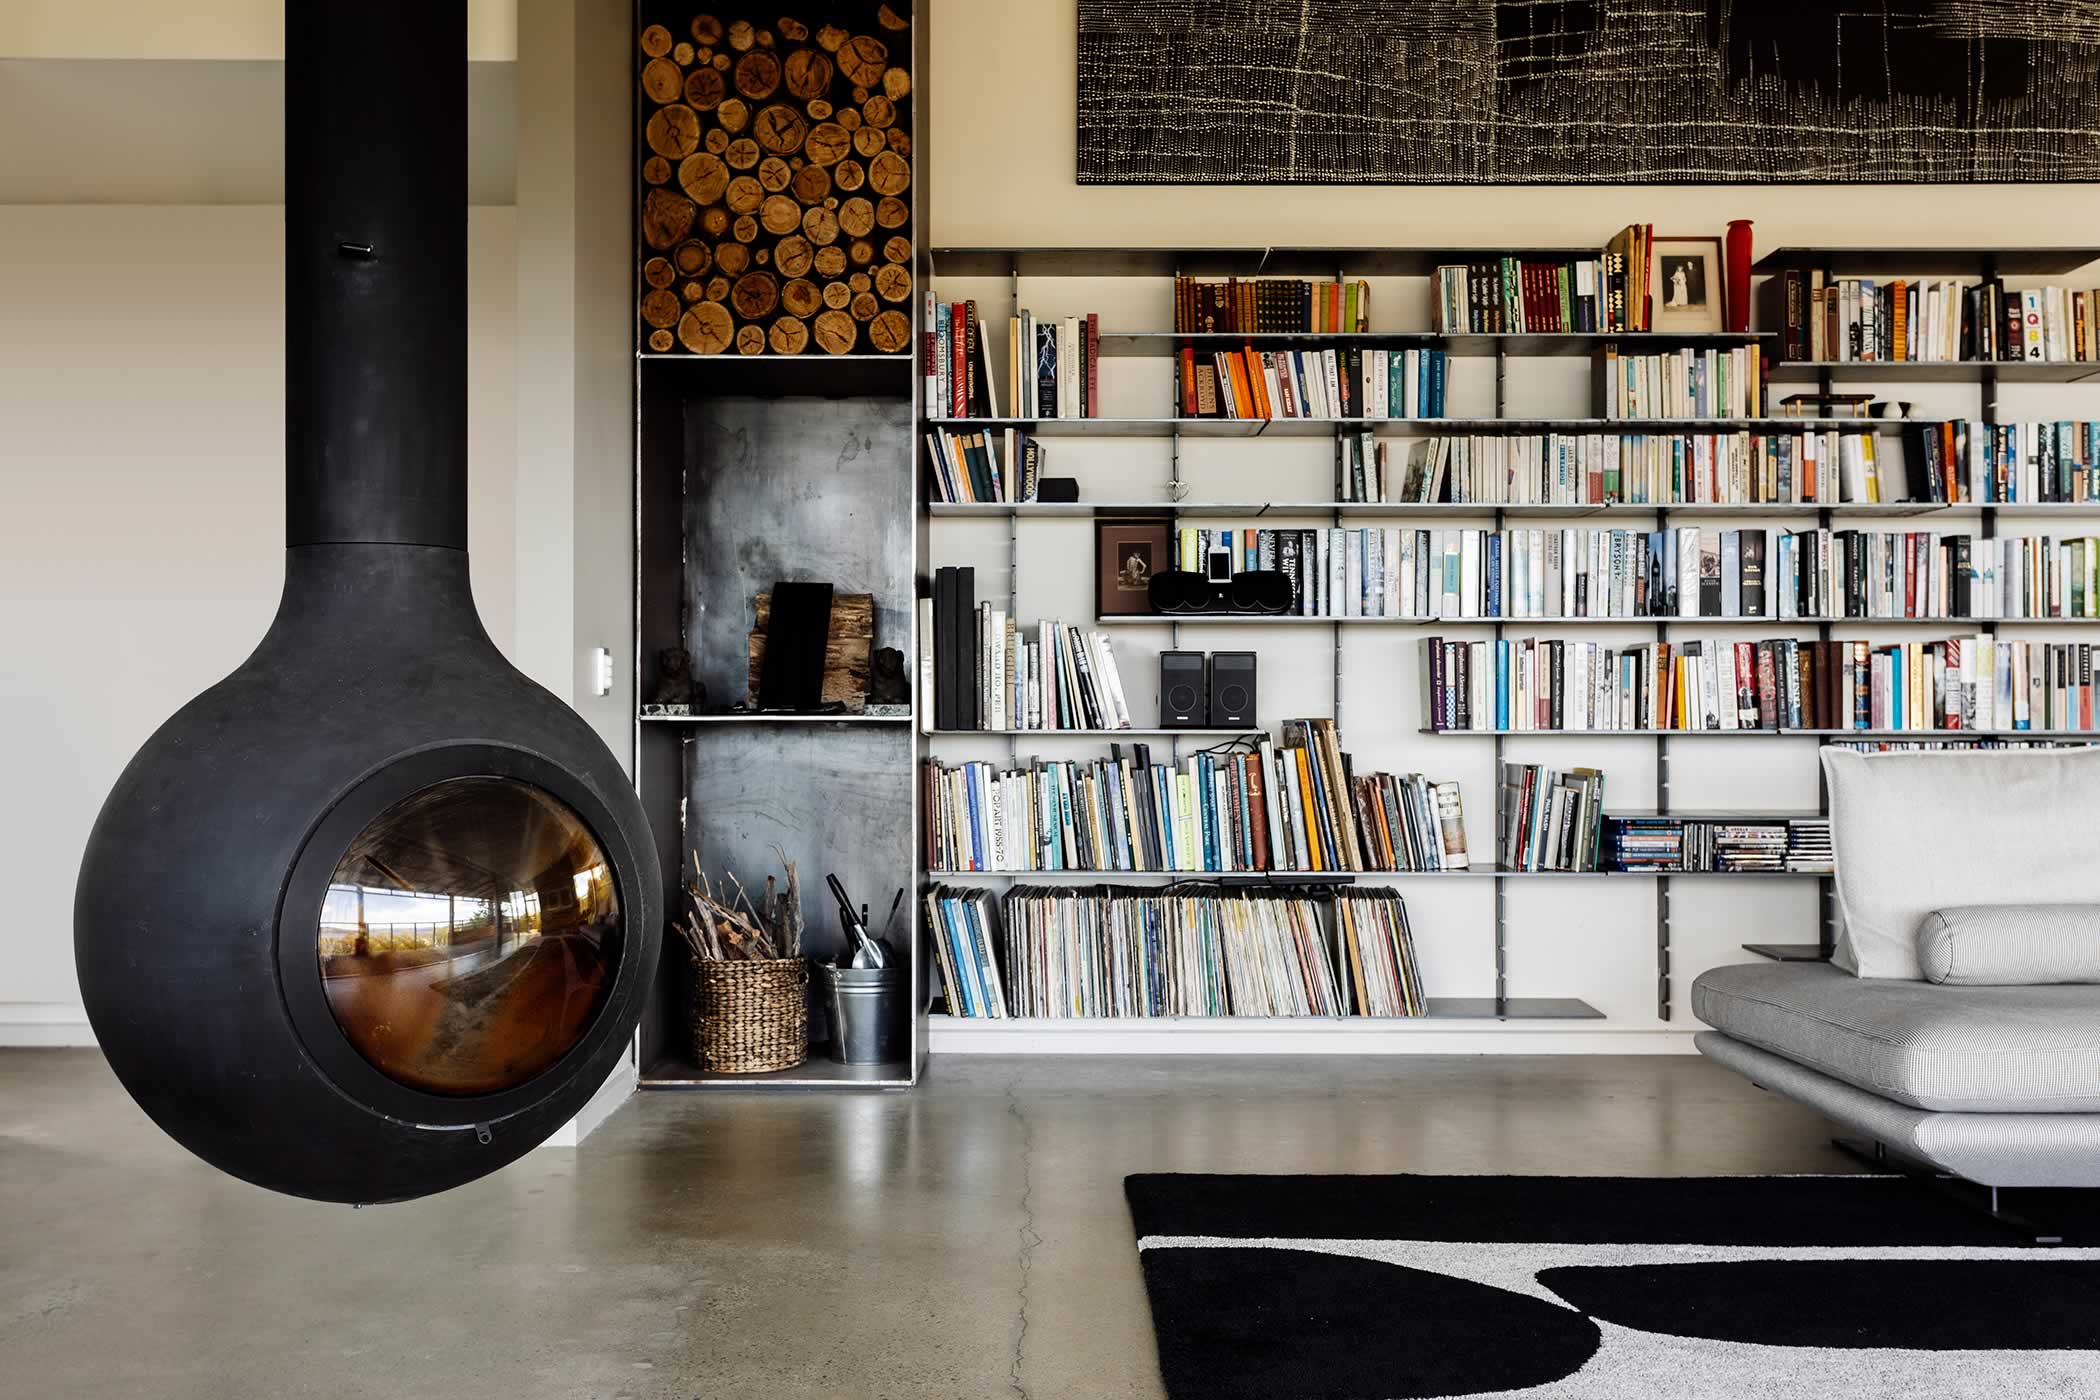 Residential extension, Kettering, Tasmania: A beautiful orb-shaped hanging wood-fire provides winter warmth and sculptural interest. Bespoke steel shelving houses books and collectables that further personalise the living room. Photo by Adam Gibson.